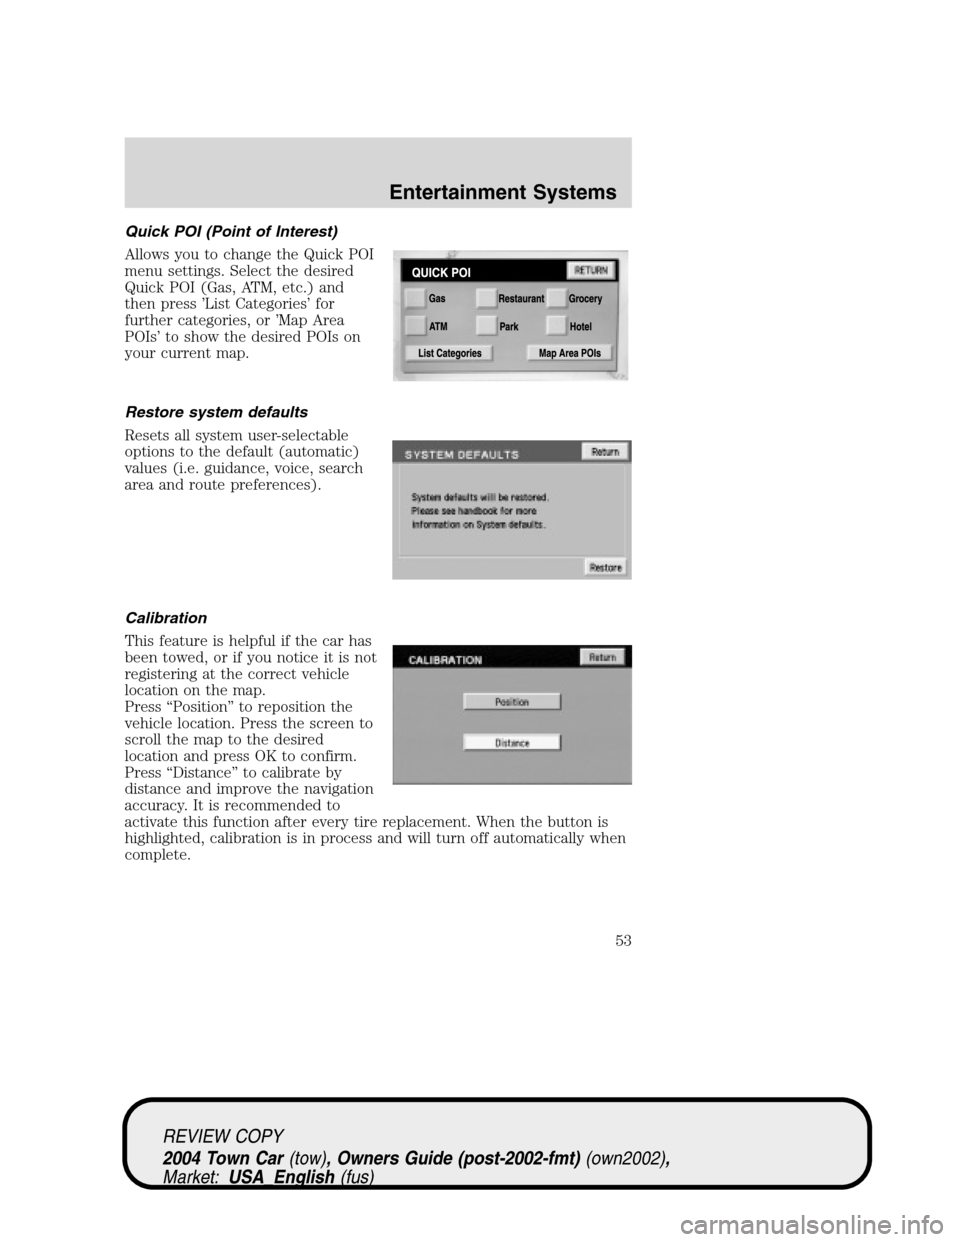 LINCOLN TOWN CAR 2004  Owners Manual Quick POI (Point of Interest)
Allows you to change the Quick POI
menu settings. Select the desired
Quick POI (Gas, ATM, etc.) and
then press’List Categories’for
further categories, or’Map Area
P